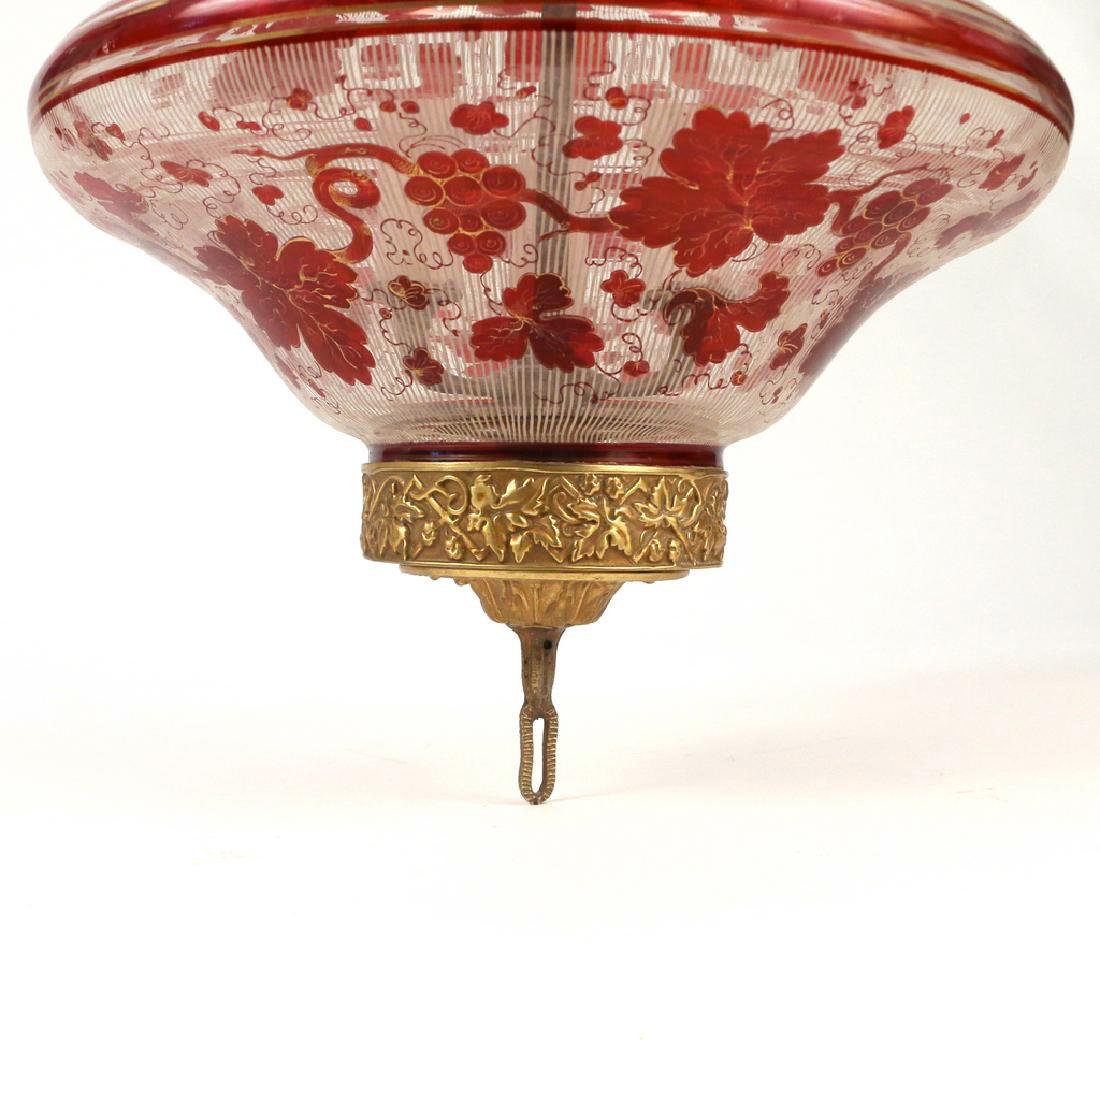 19th Century Fine Ormolu-Mounted Bohemian Enameled Glass Hanging Fixture For Sale